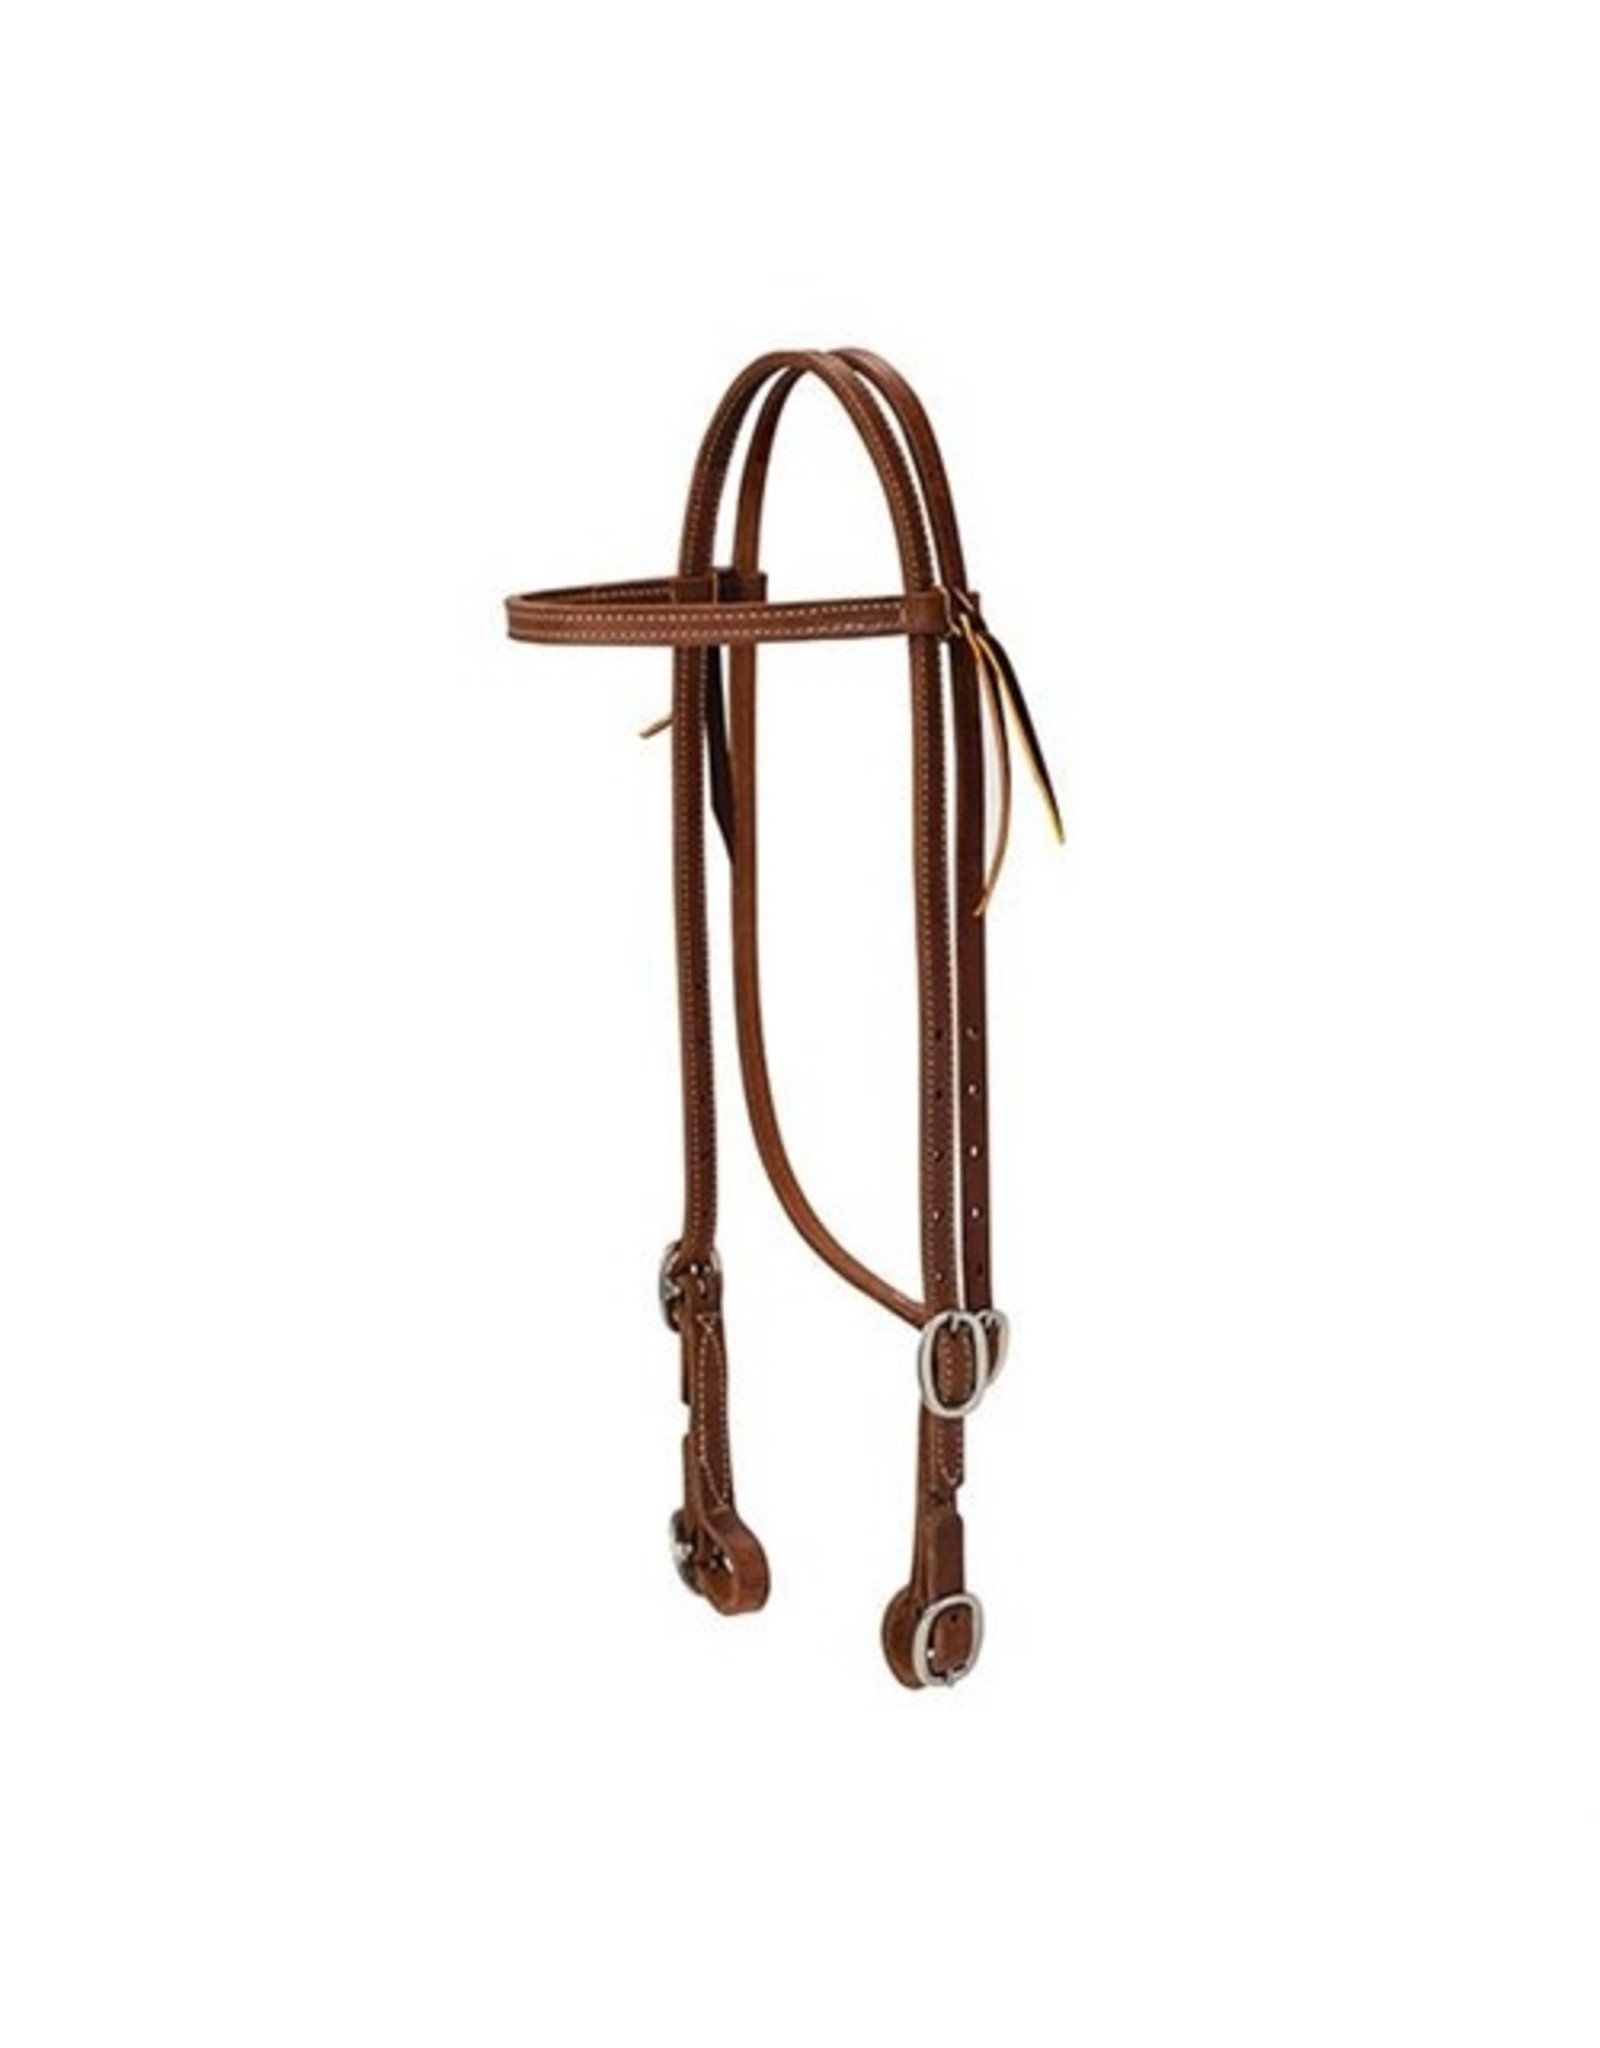 Pro Tack Browband Headstall with Buckle Bit Ends